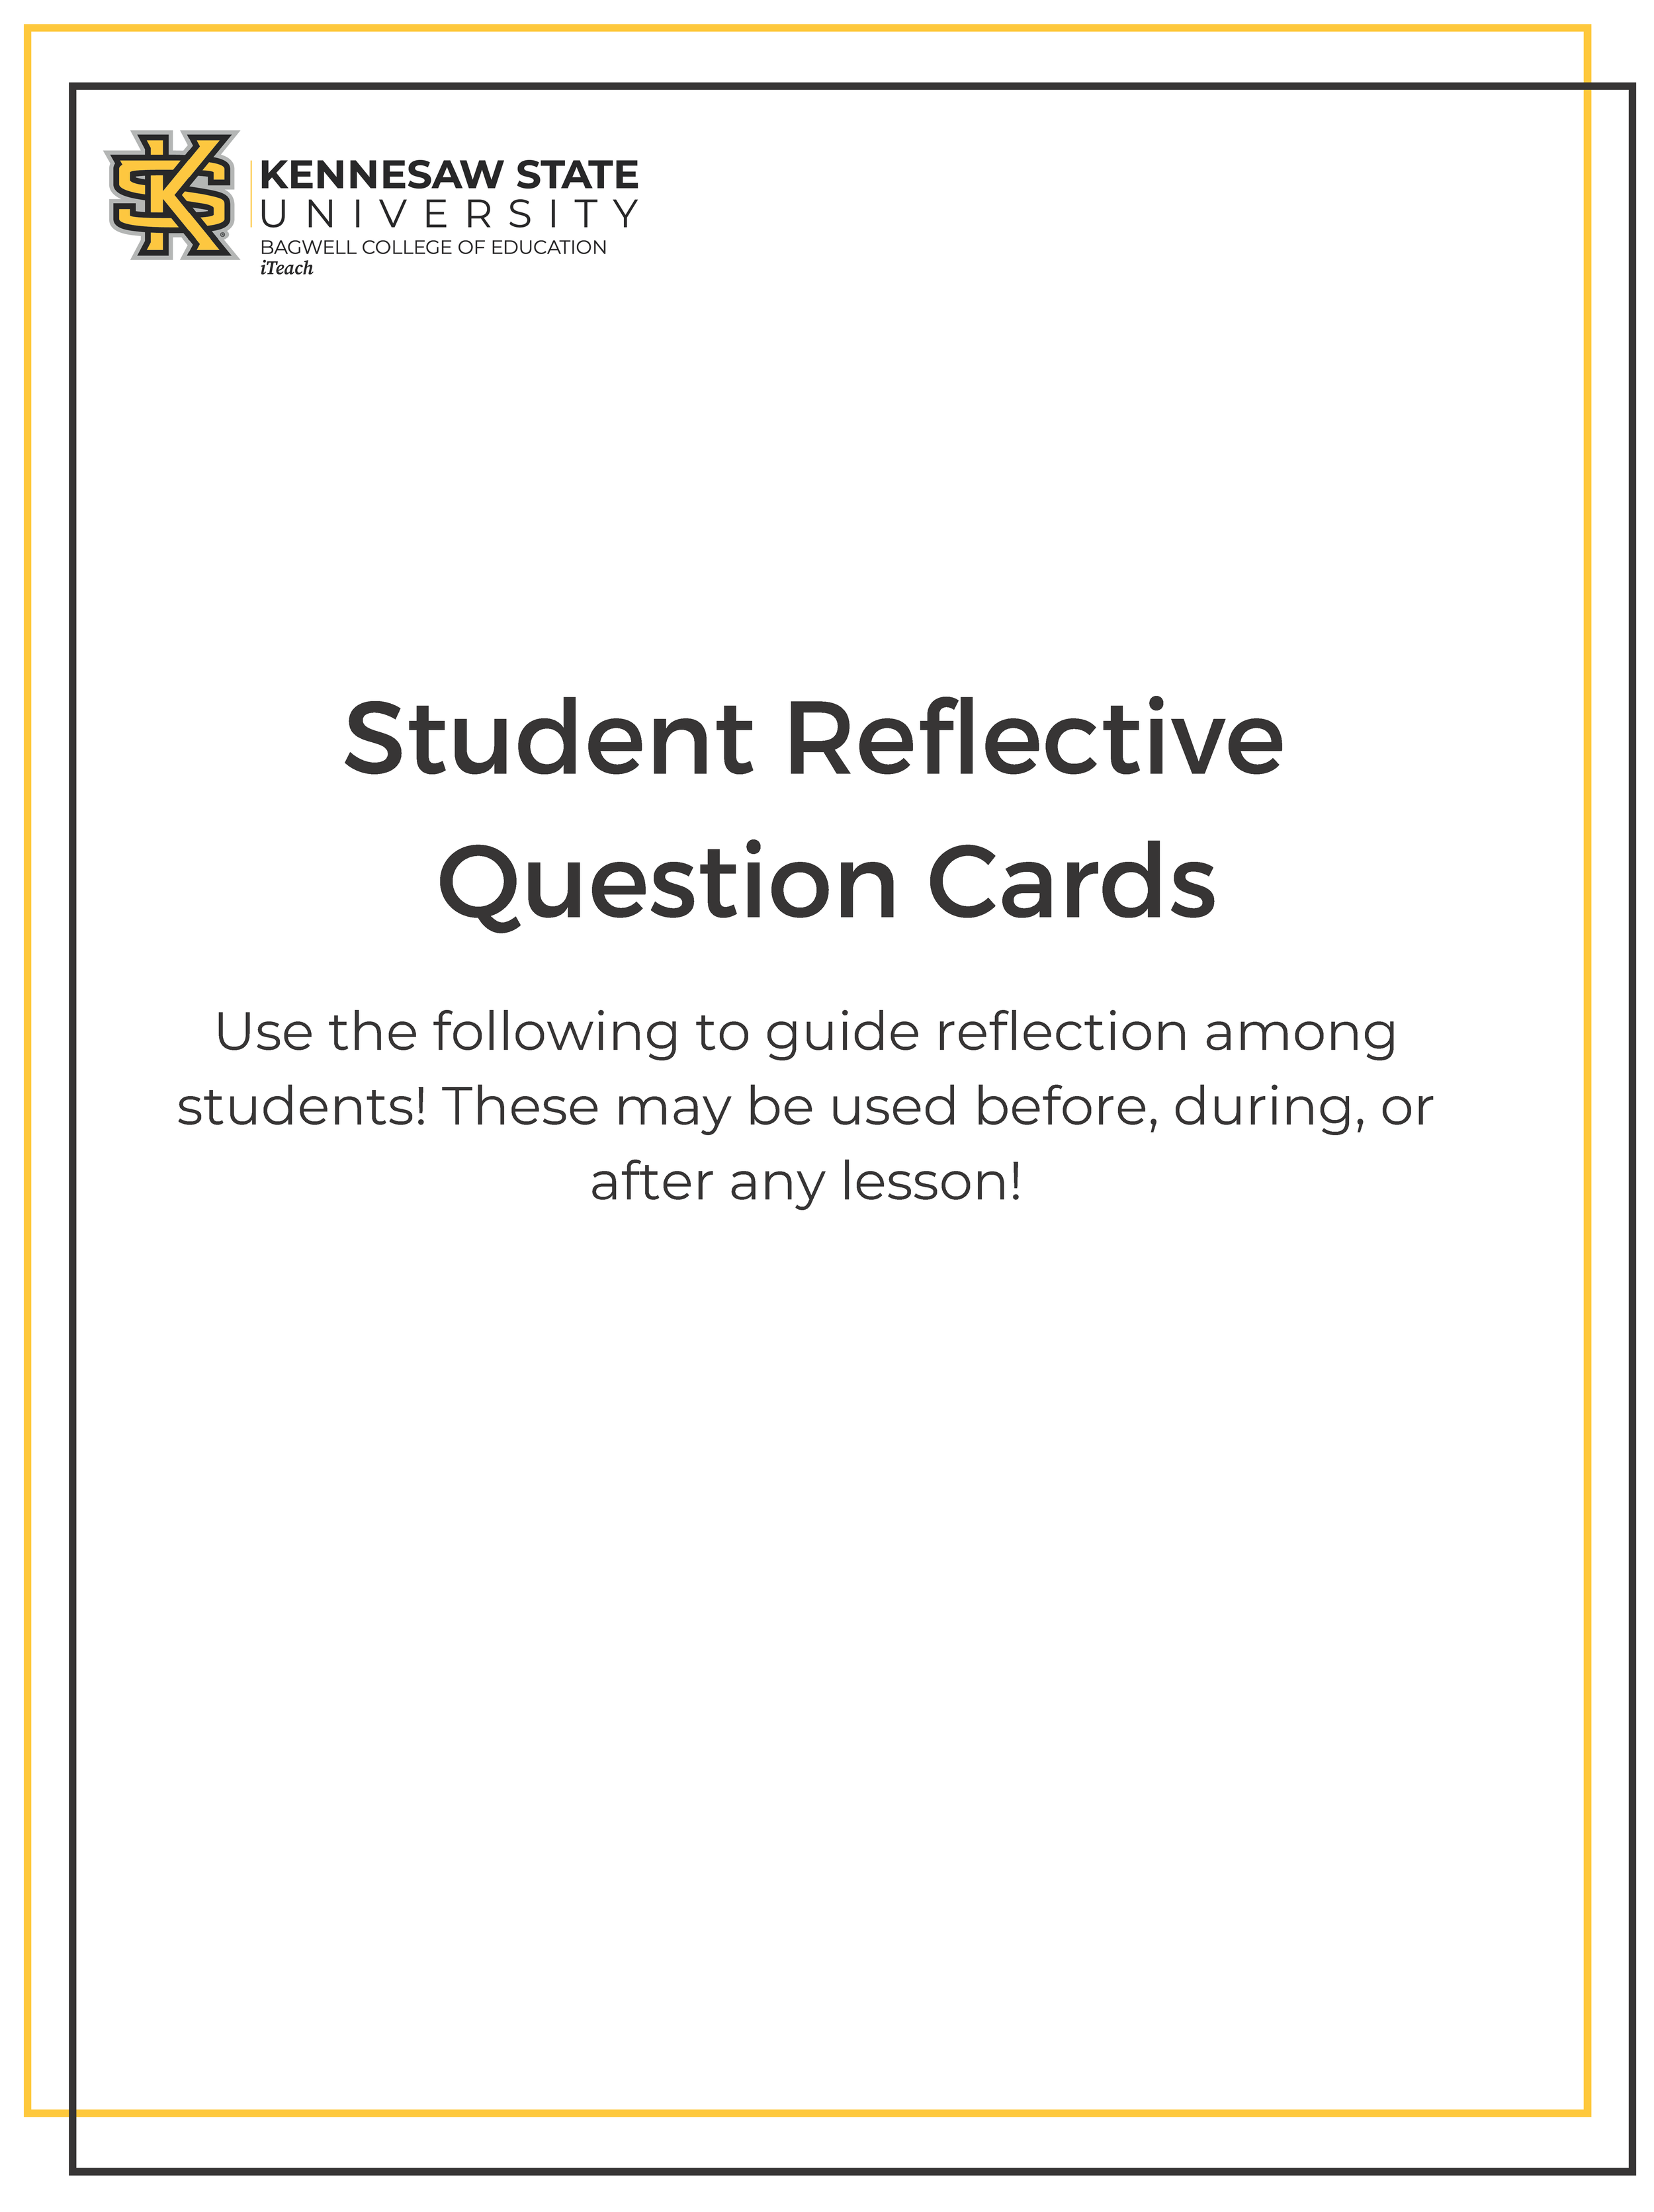 Student Reflection Question Cards_Page_1.png